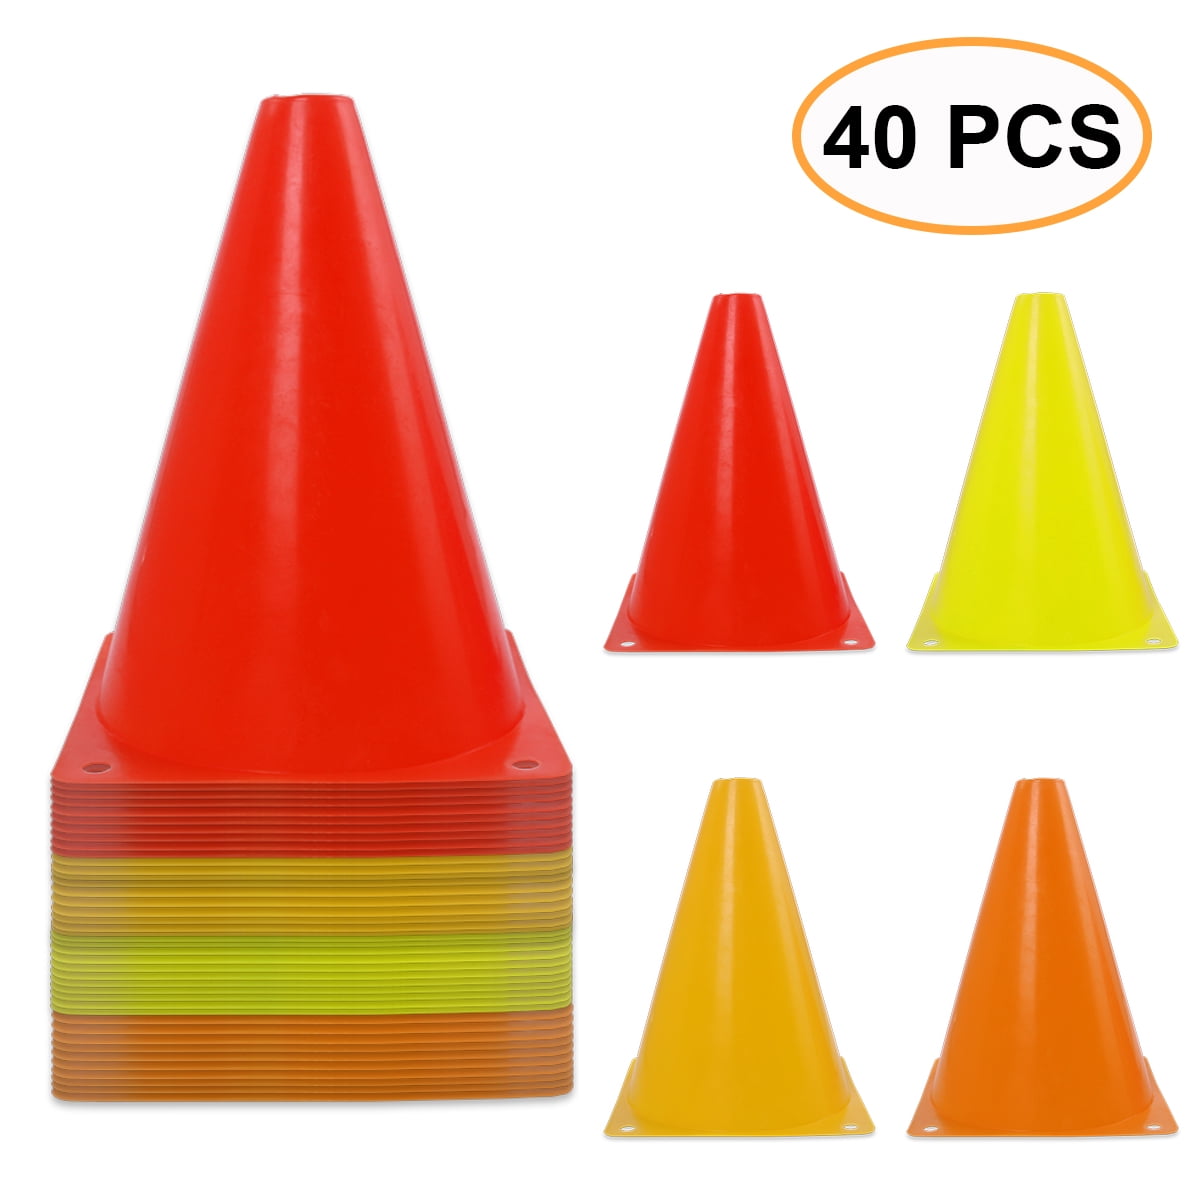 Indoor/Outdoor Sports Soccer Flexible Cone Soccer Barrier Plastic Obstacle Cup Football Basketball Training Sport Equipment Training Traffic Cones